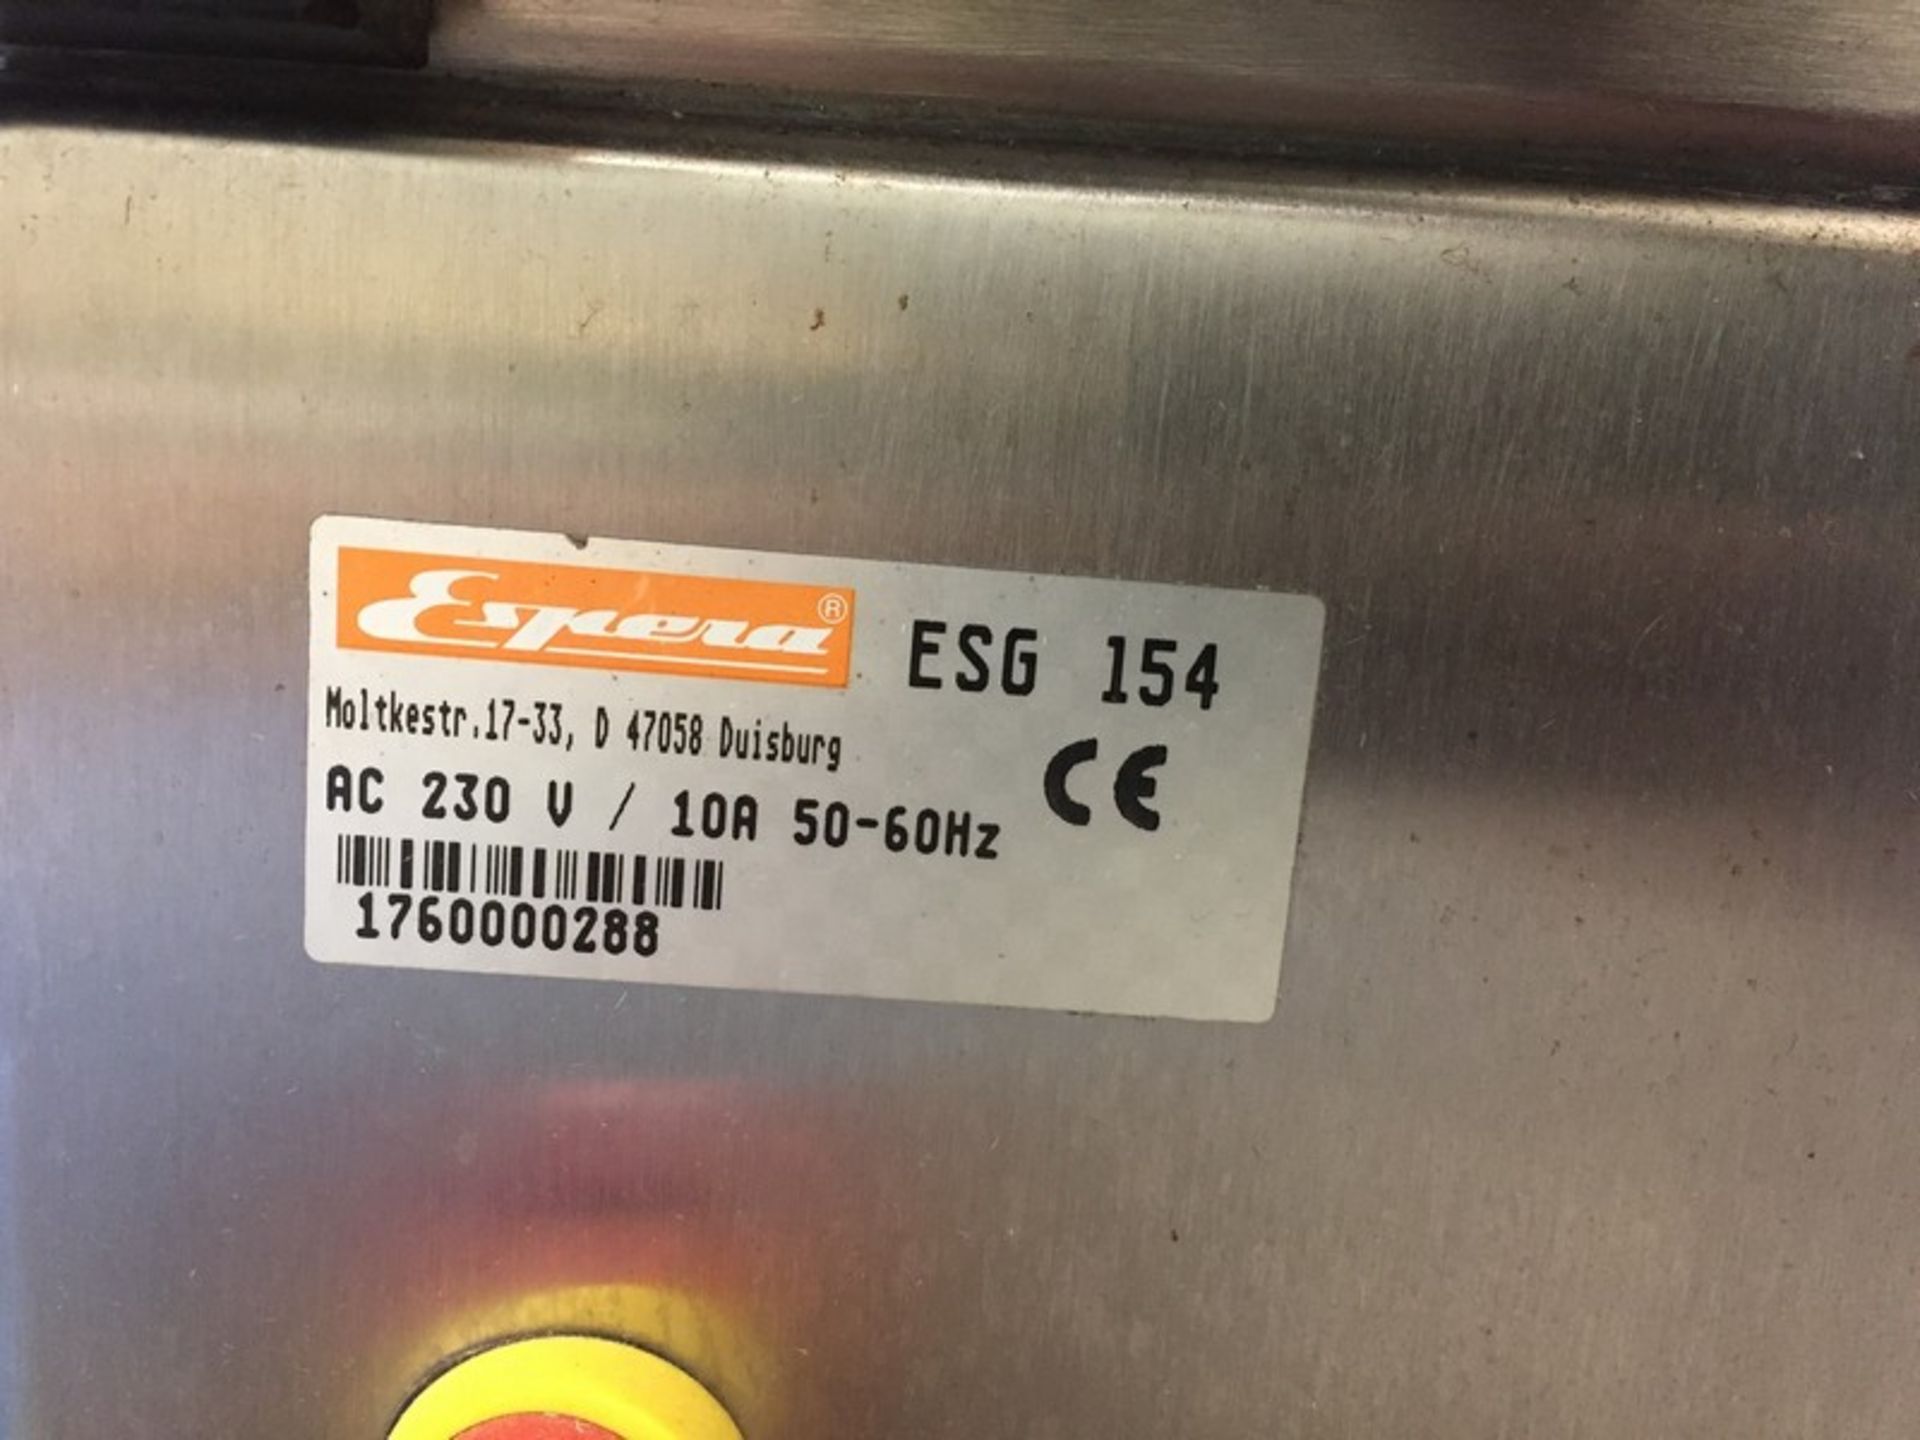 2015 Espera Weigh Pure Price Labeler, Model 7000, 230 V, 60 Hz, (Unit #95) (Located New Bothwell, - Image 4 of 10